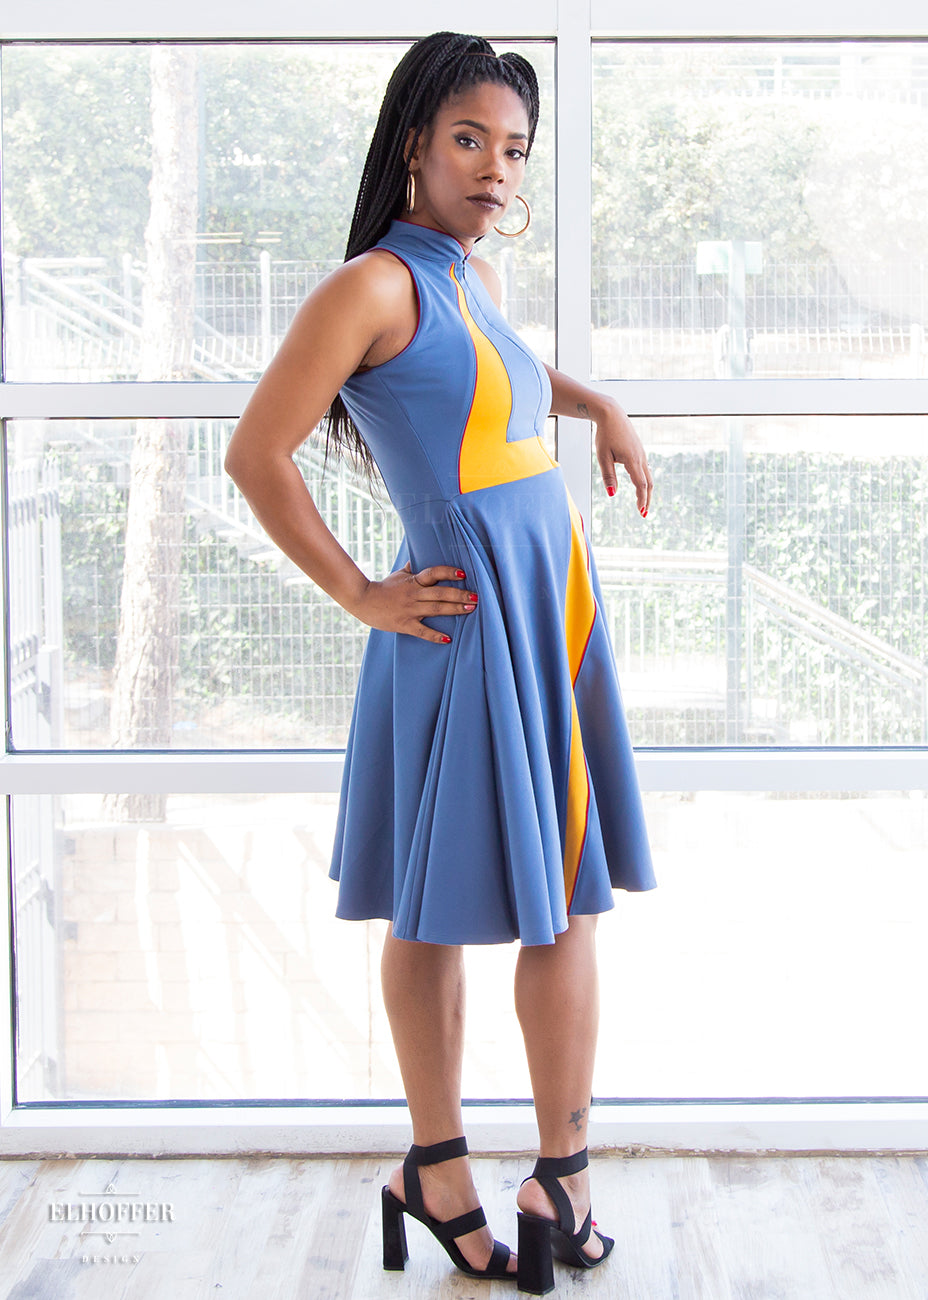 Krystina, a size small medium dark skinned model with long braids, shows of the side of the high-necked sleeveless blue dress. The dress is piped in crimson and has a yellow lightening bolt emblazoned over the front of it. There is a zip down the middle down to the waist.